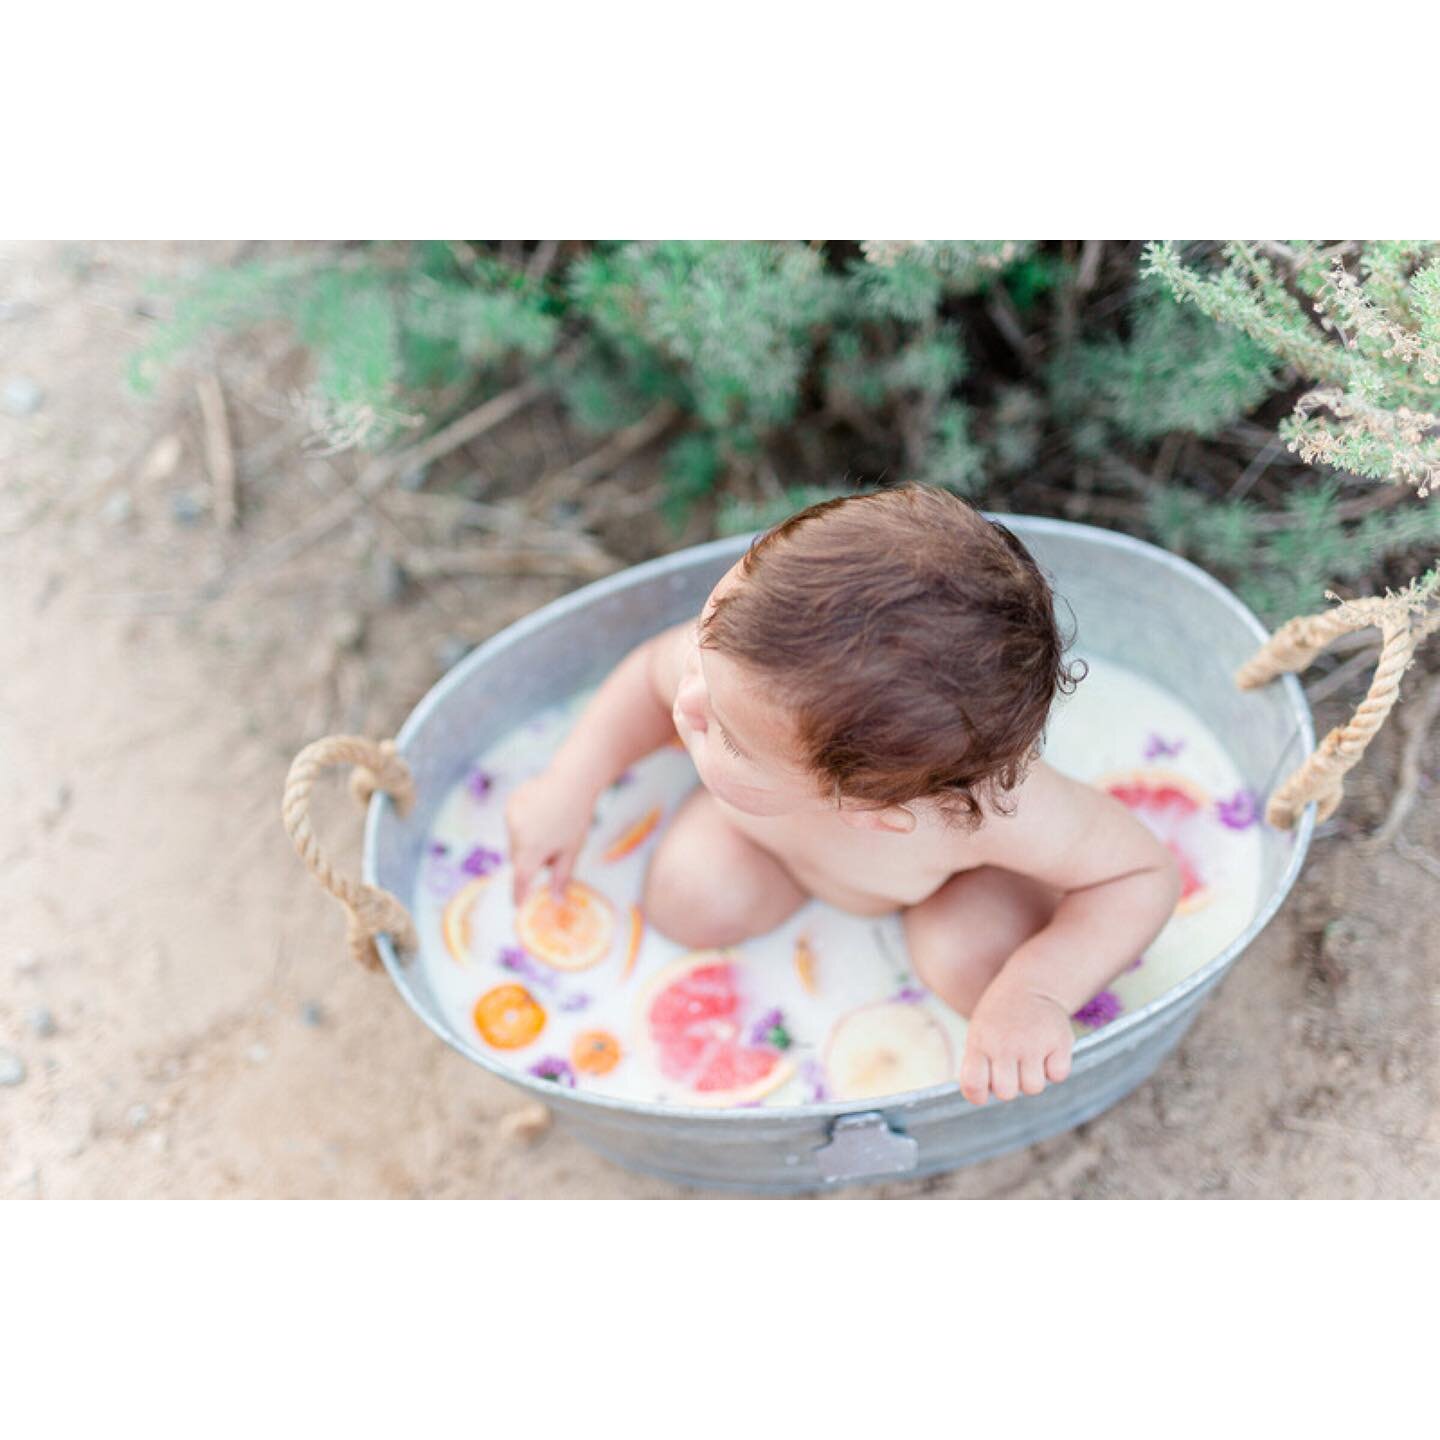 Such a cute milk bath session! What better way to use up your old pumped milk 😂. 
.
.

.
.
.

.
.
.
.
.
.
.
.
.
.
.
.
.
#erinchristinephotography #sandiegophotographer #maternityphotographer #sandiegomaternityphotographer #motherhood #communityoverc